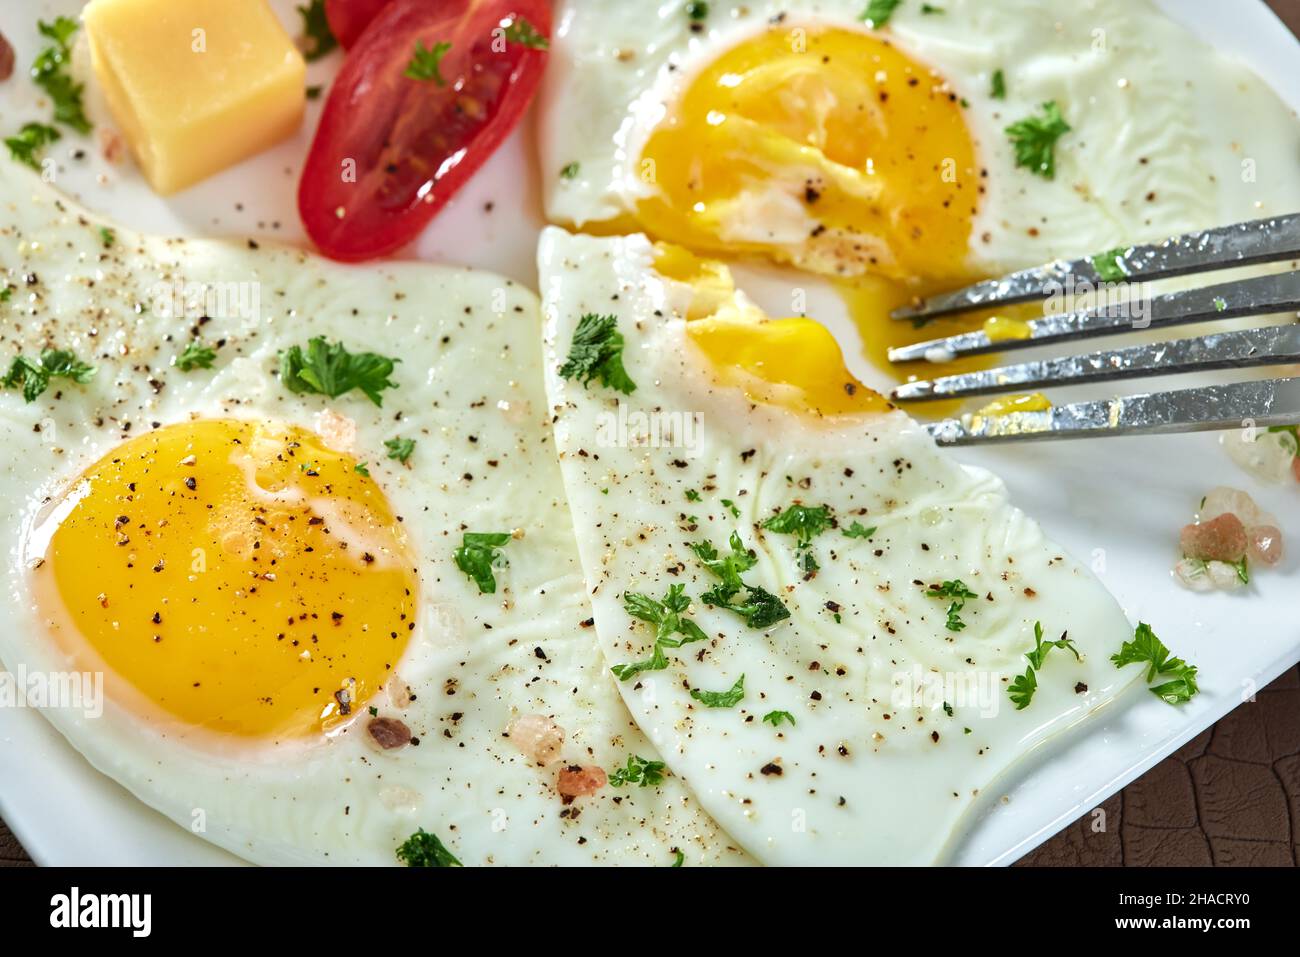 Eating Fried eggs with cherry tomatoes and cheese Stock Photo